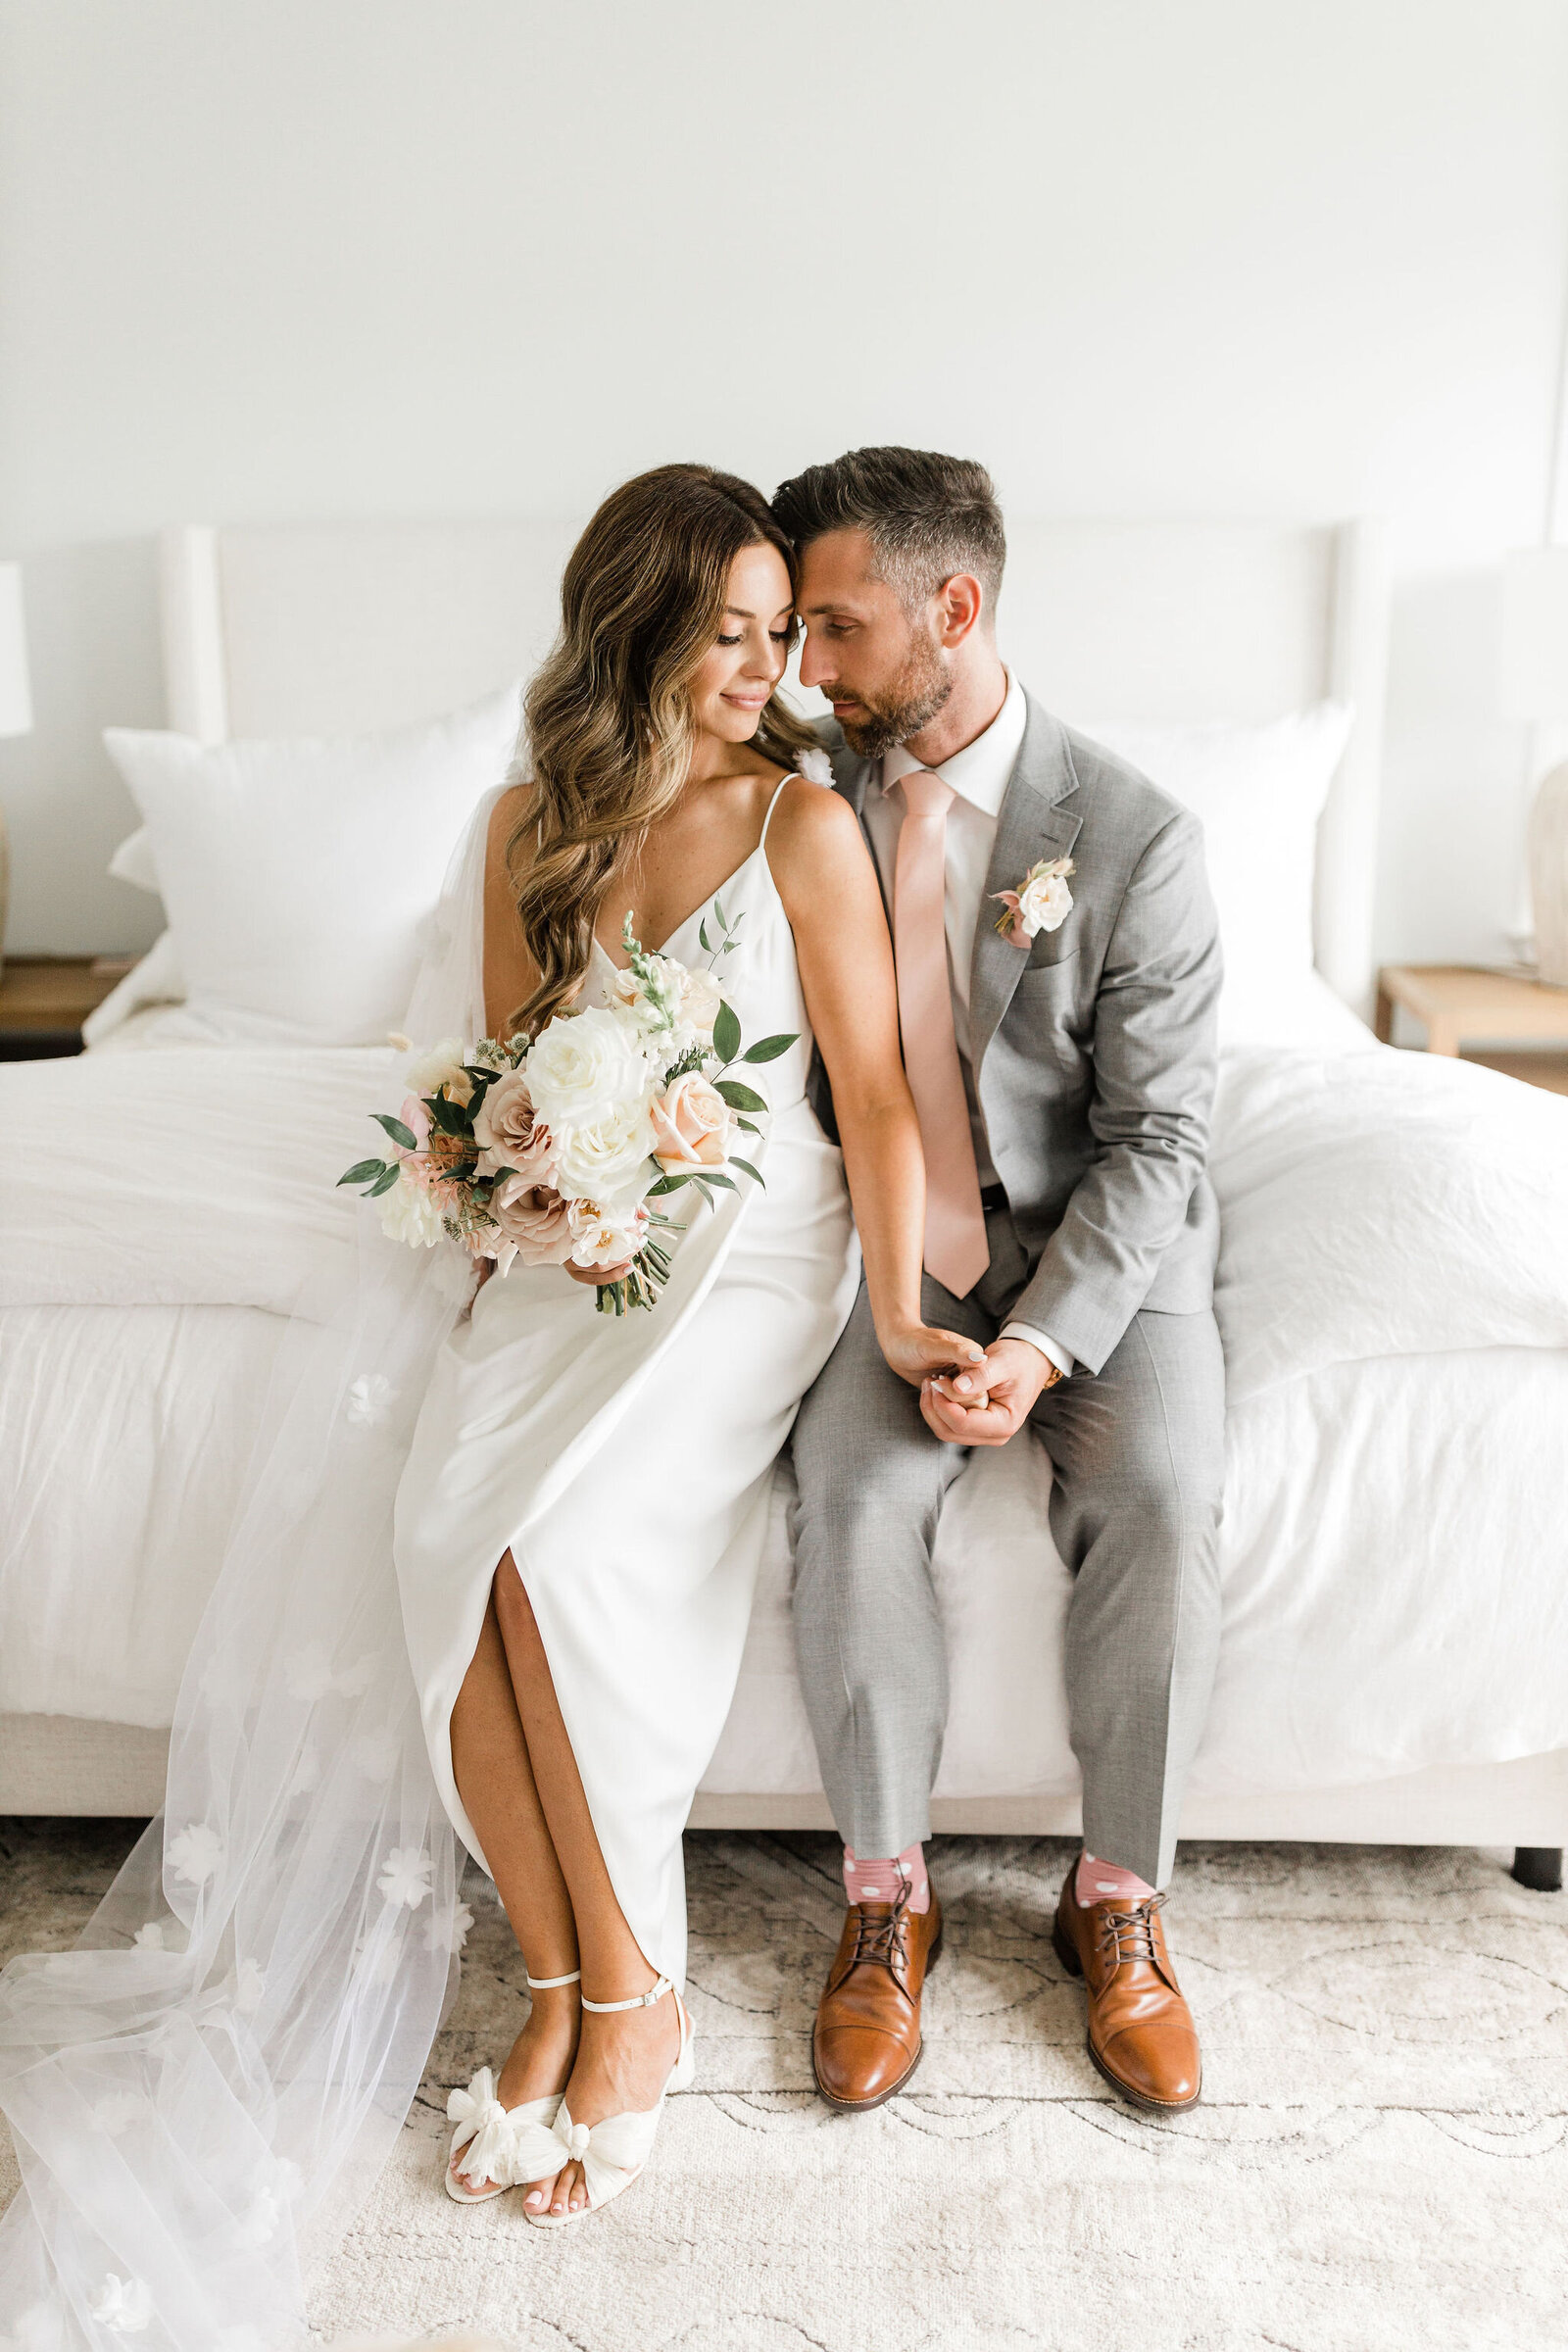 Stunning Wedding Day Couples Photo | Raleigh NC | The Axtells Photo and Film